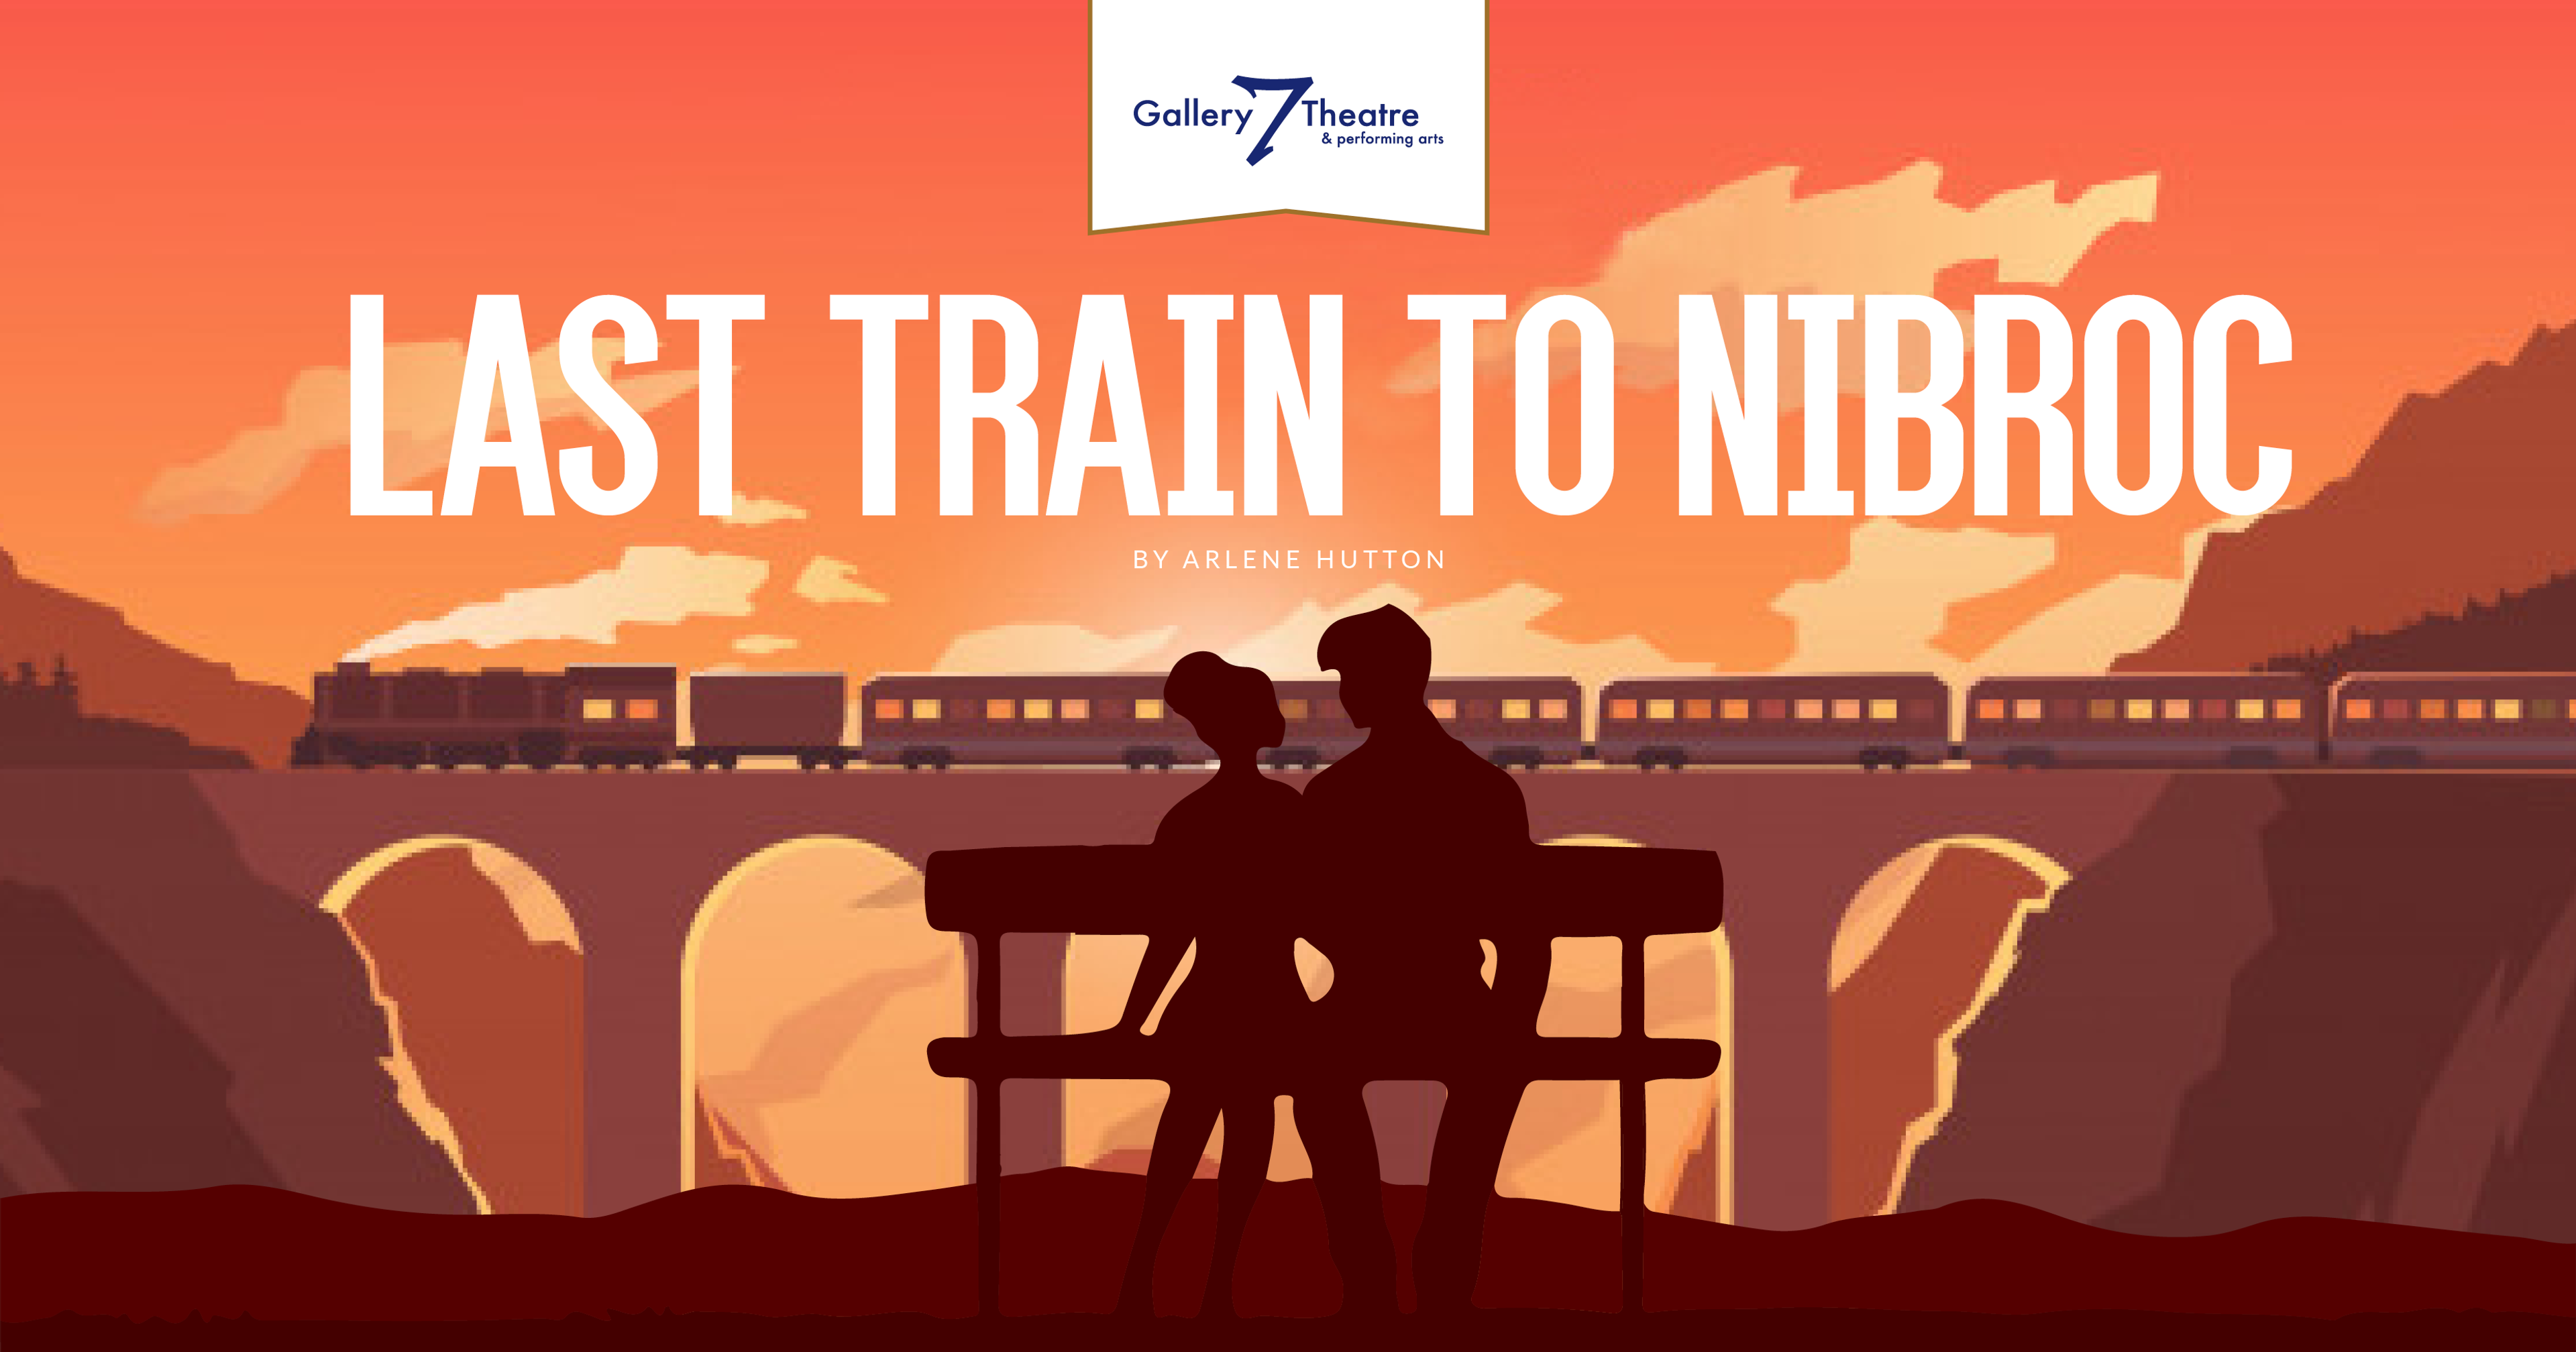 A couple sits on a bench, staring into each other's eyes, as a train passes over a bridge in the distance.